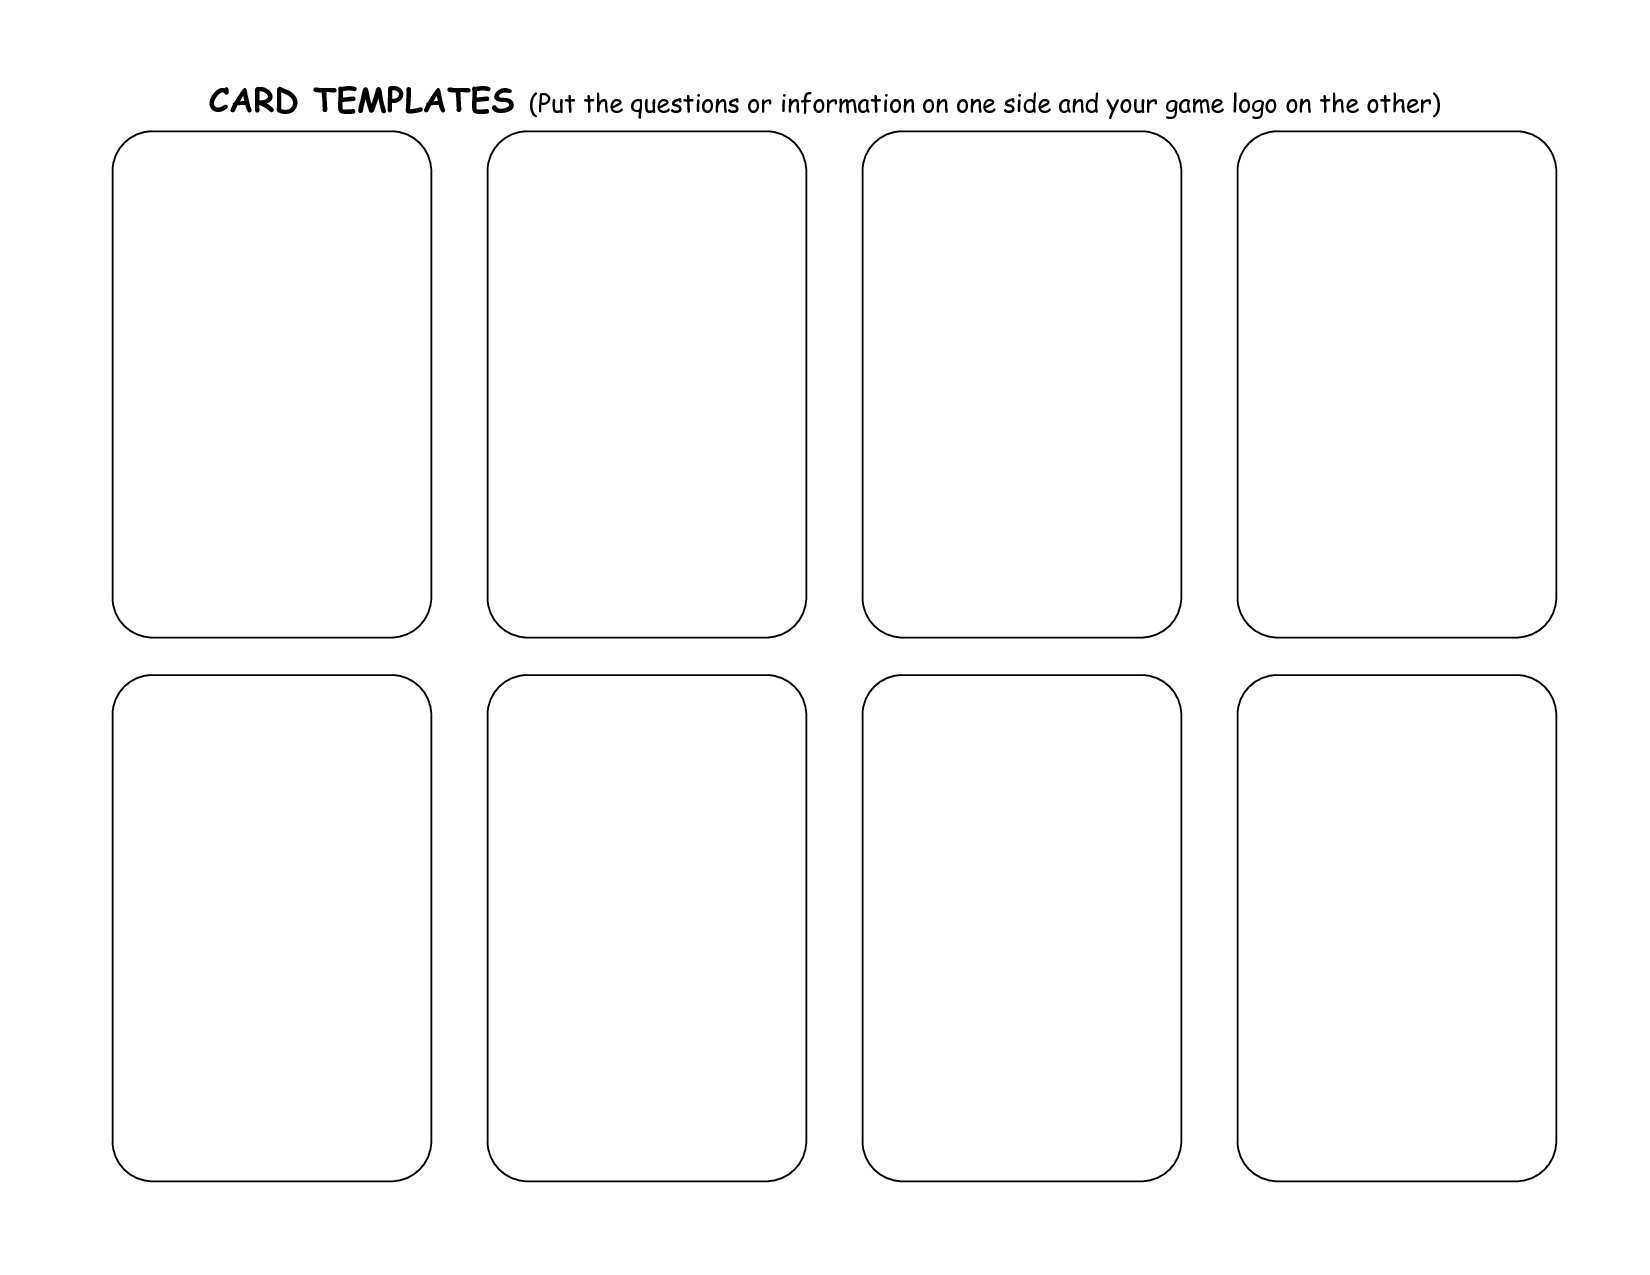 58 Free Word Template Card Game With Stunning Designword In Template For Cards In Word